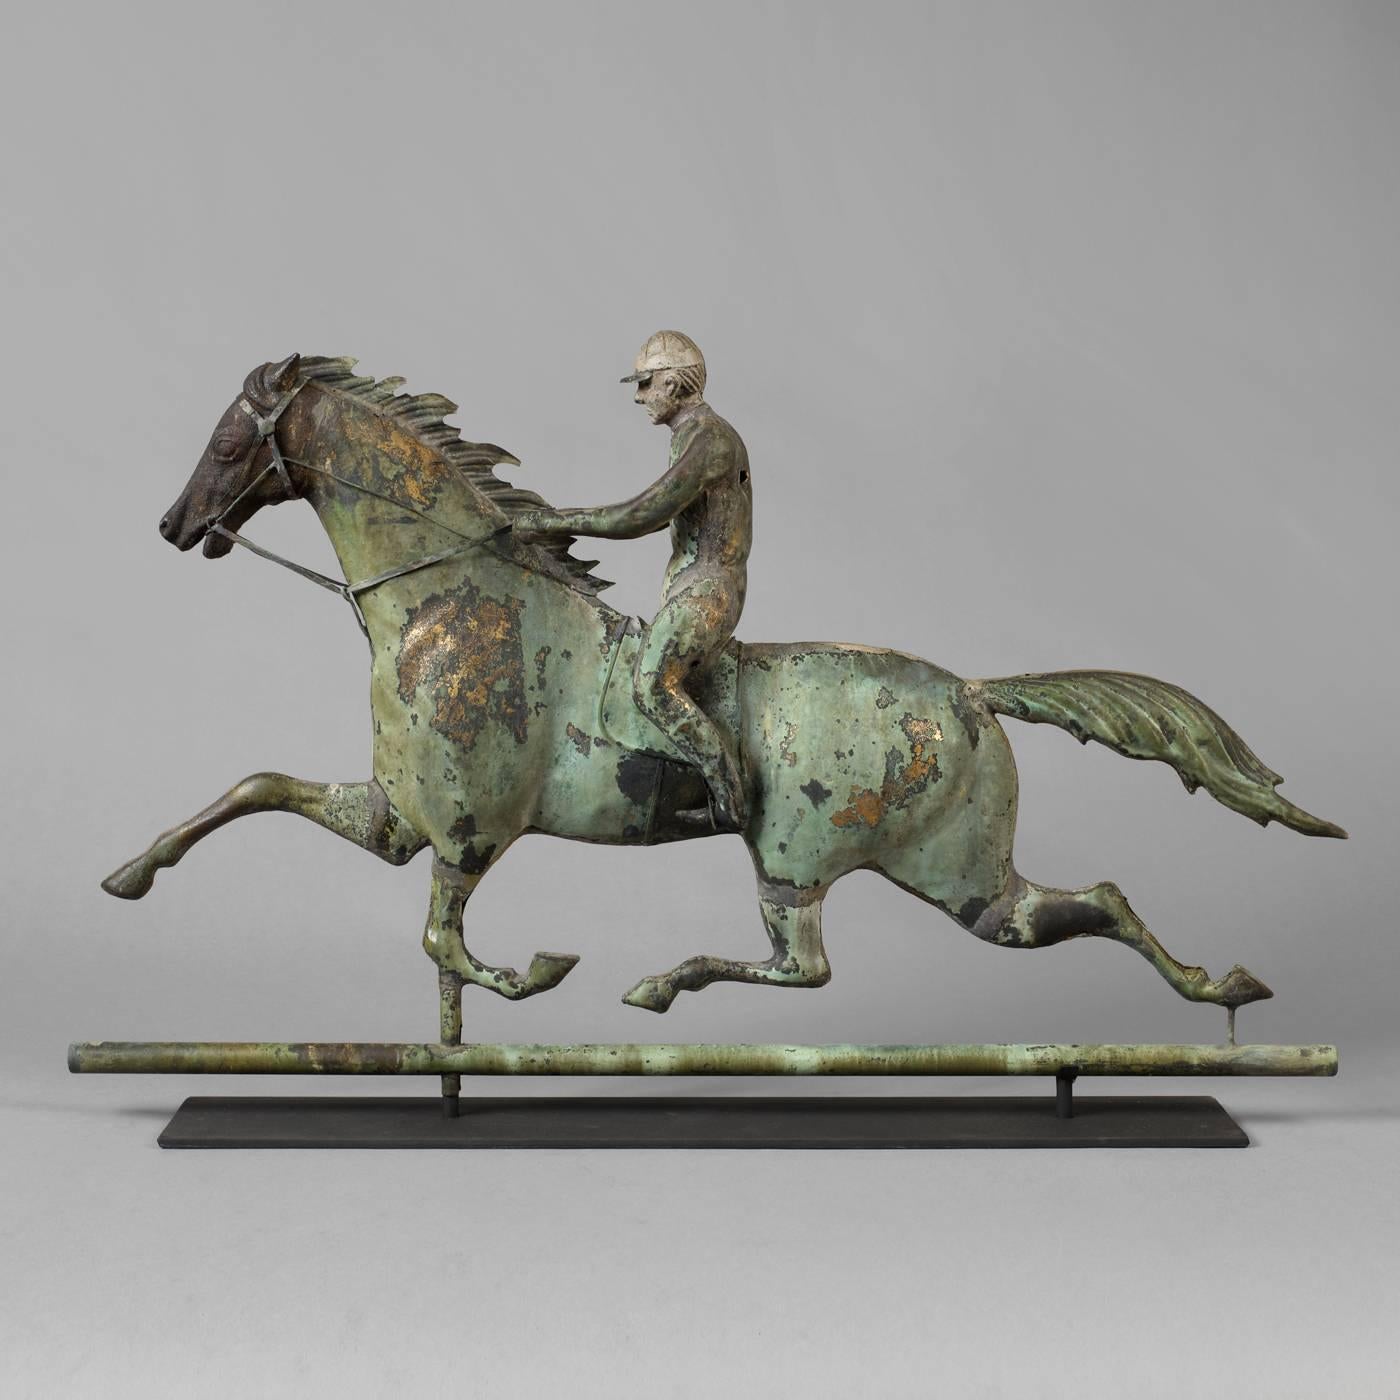 Attributed to Cushing and white, Waltham, Massachusetts, circa 1880-1890. Copper, copper tubing, cast iron, zinc Condition: Fine condition, minor imperfections, retains traces of original gilt with Verdigris surface. The form of a horse with jockey